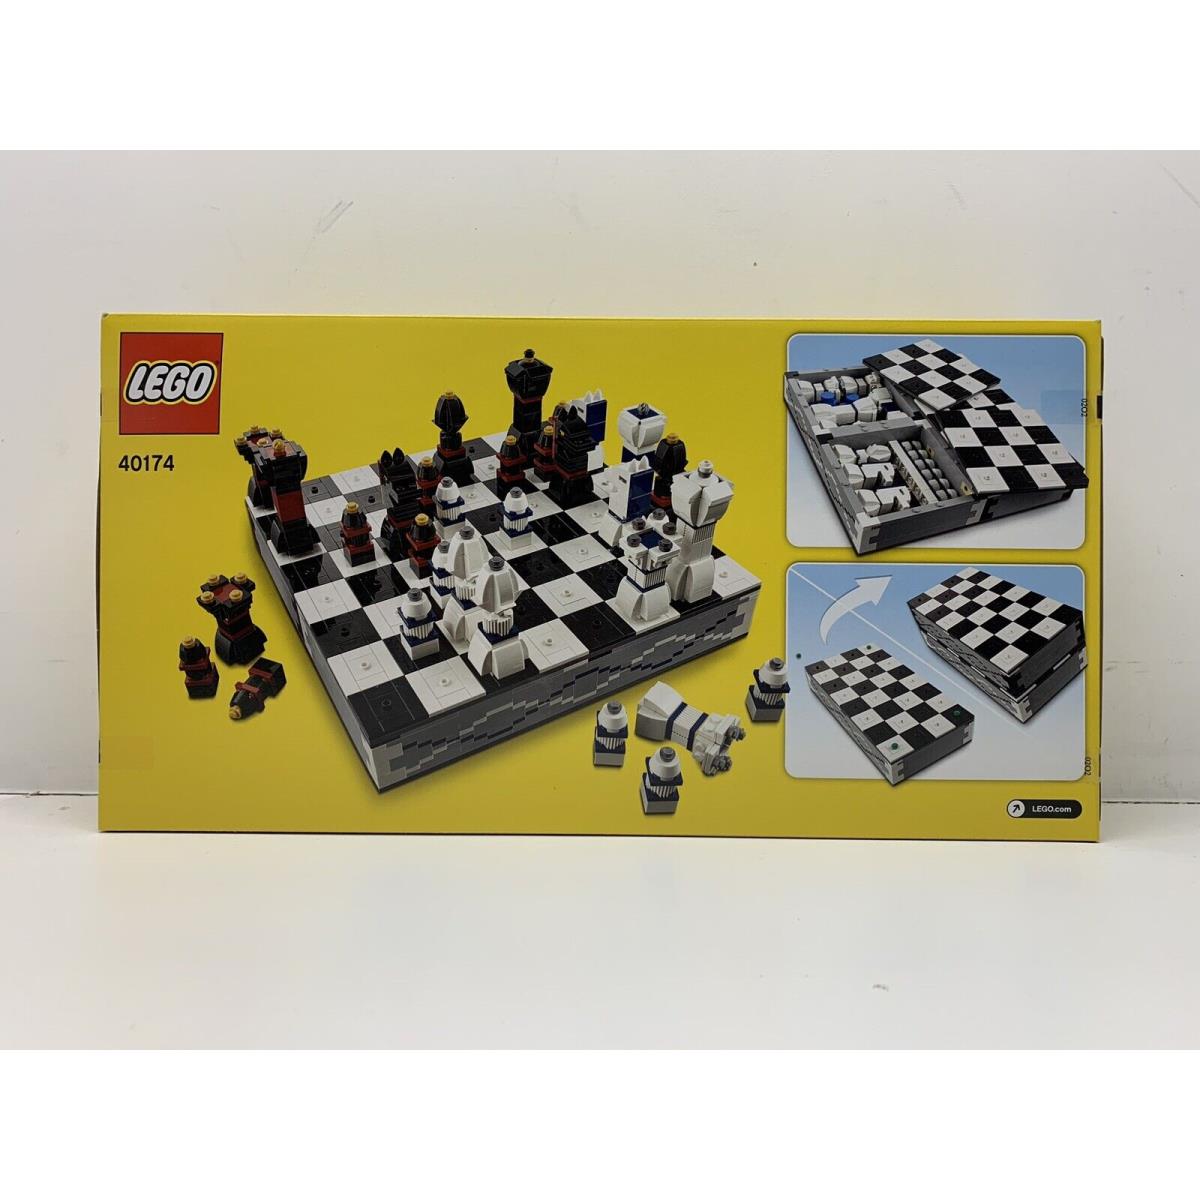 Lego 40174 Chess Checkers 2 in 1 Classic Iconic Set